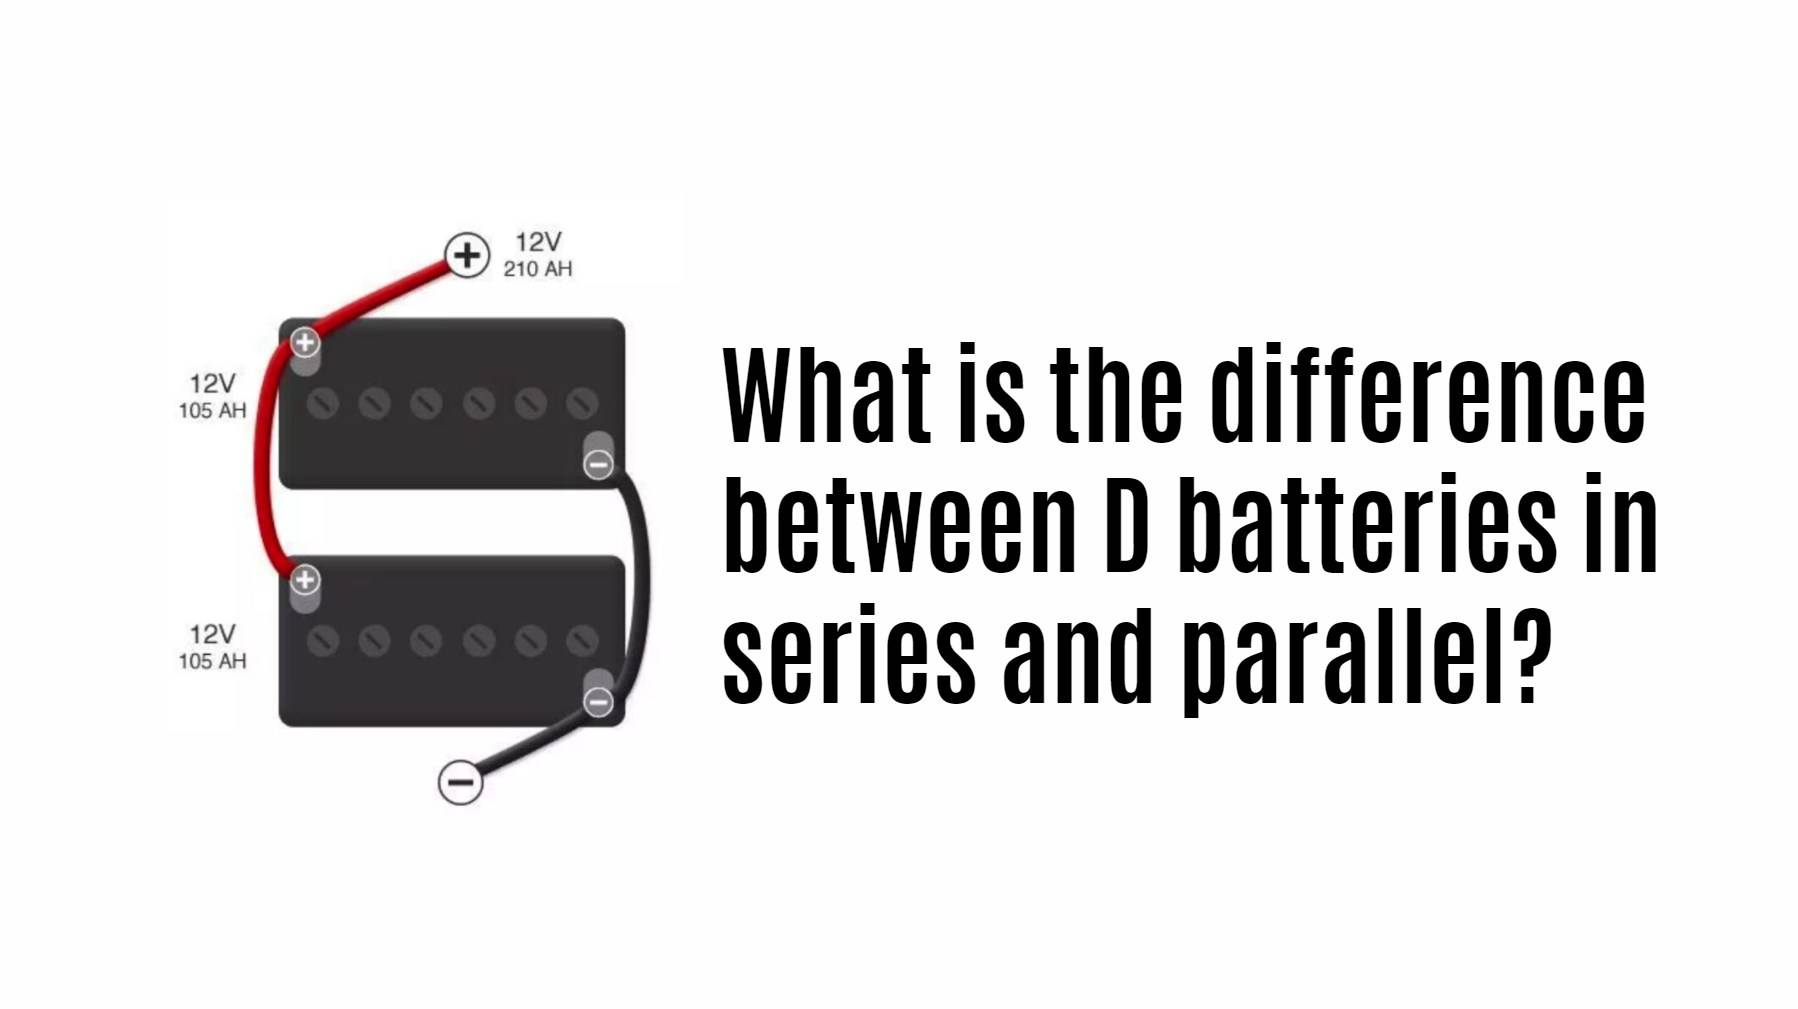 What is the difference between D batteries in series and parallel?